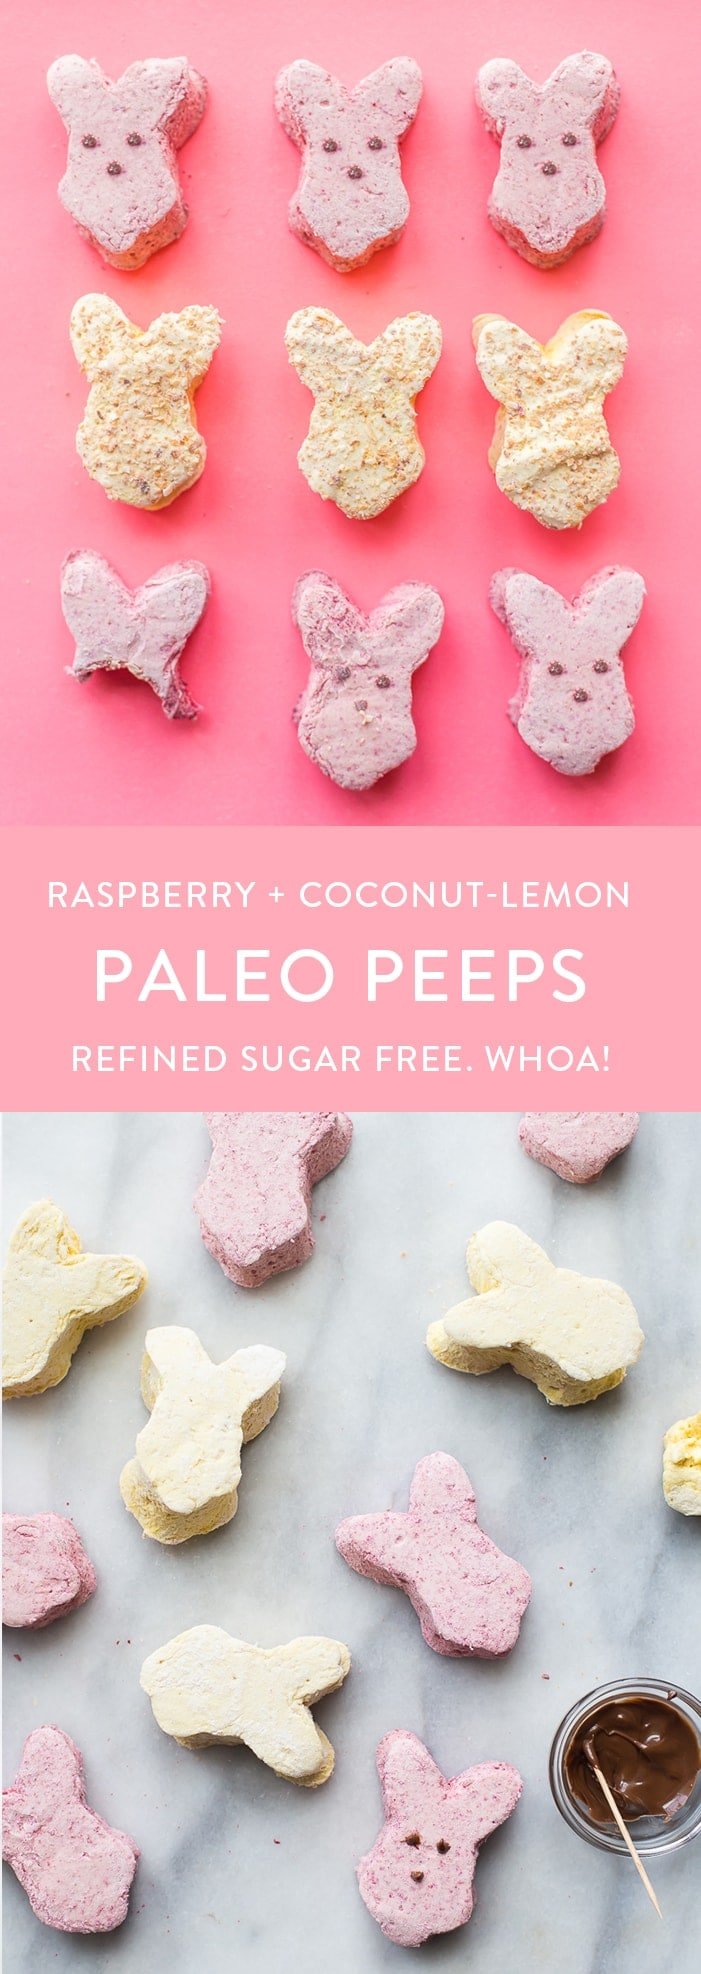 These paleo peeps are the perfect paleo Easter candy. Made from homemade raspberry paleo marshmallows and toasted coconut lemon paleo marshmallows, you'll be shocked at how similar they are to the traditional treat, but made only with healthy ingredients. A paleo Easter staple! Or cut them into cubes for an anytime paleo dessert.